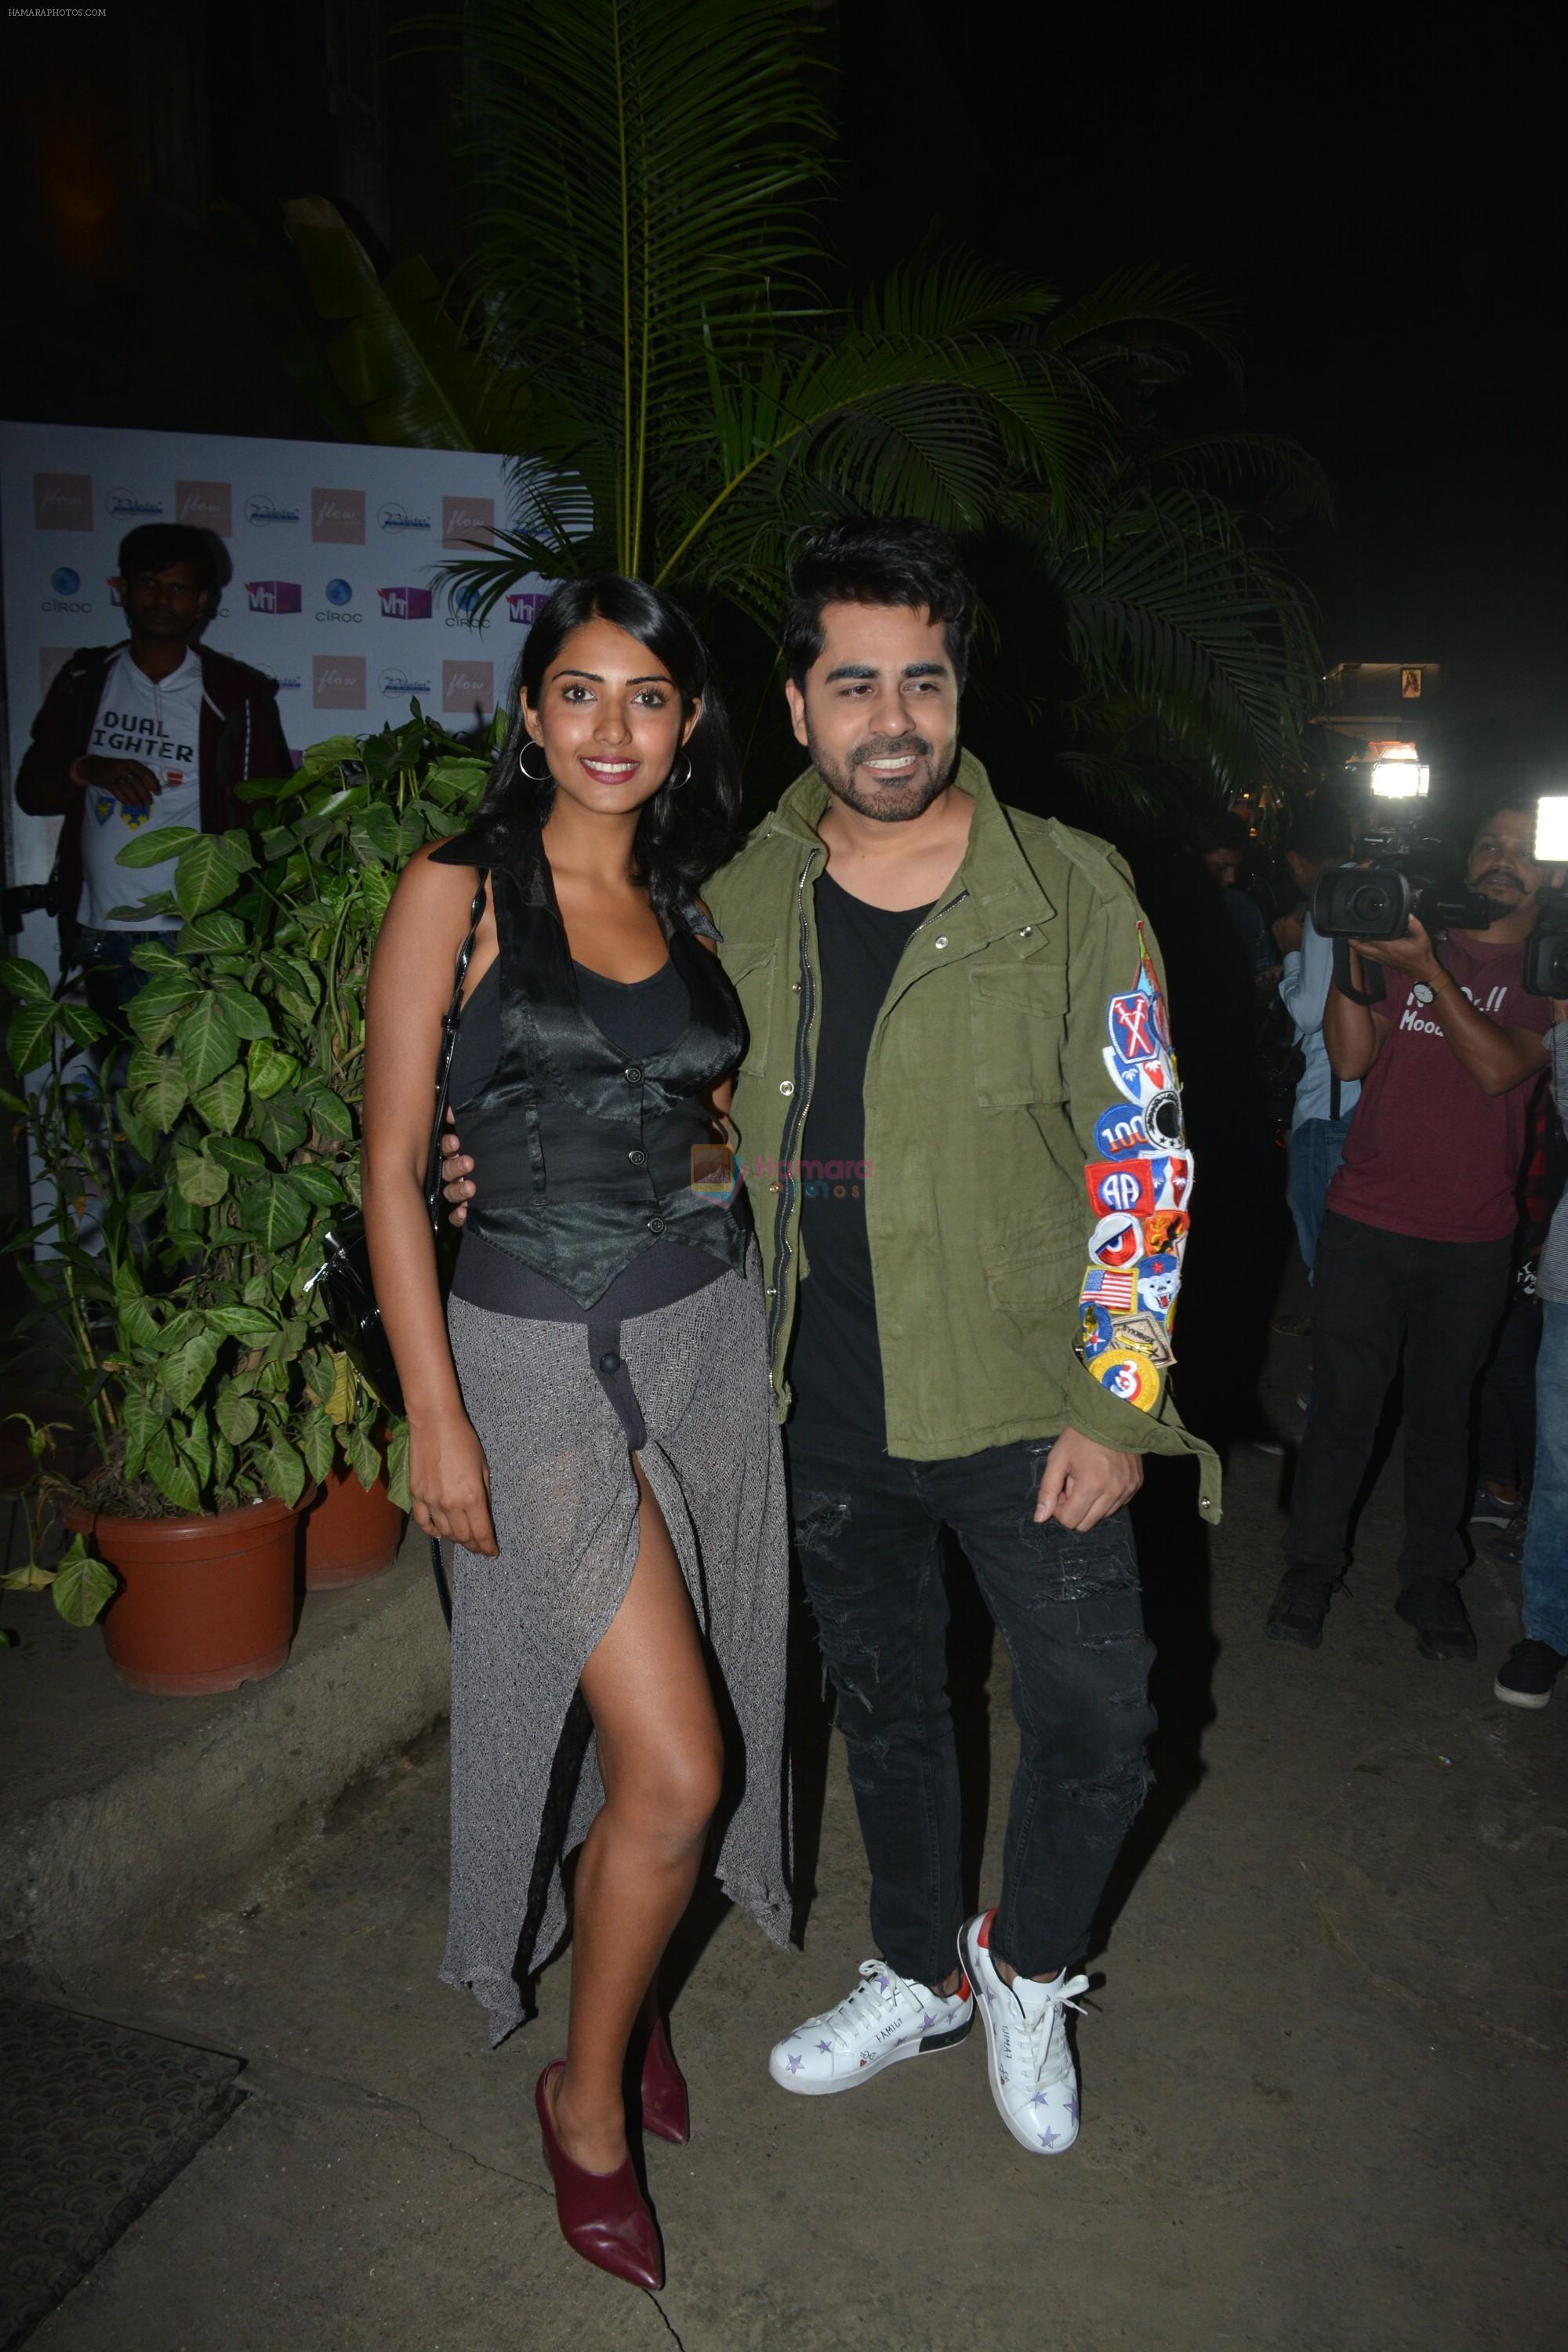 At Music Video Launch Of Namrata Purohit _Flow_on 19th Feb 2019